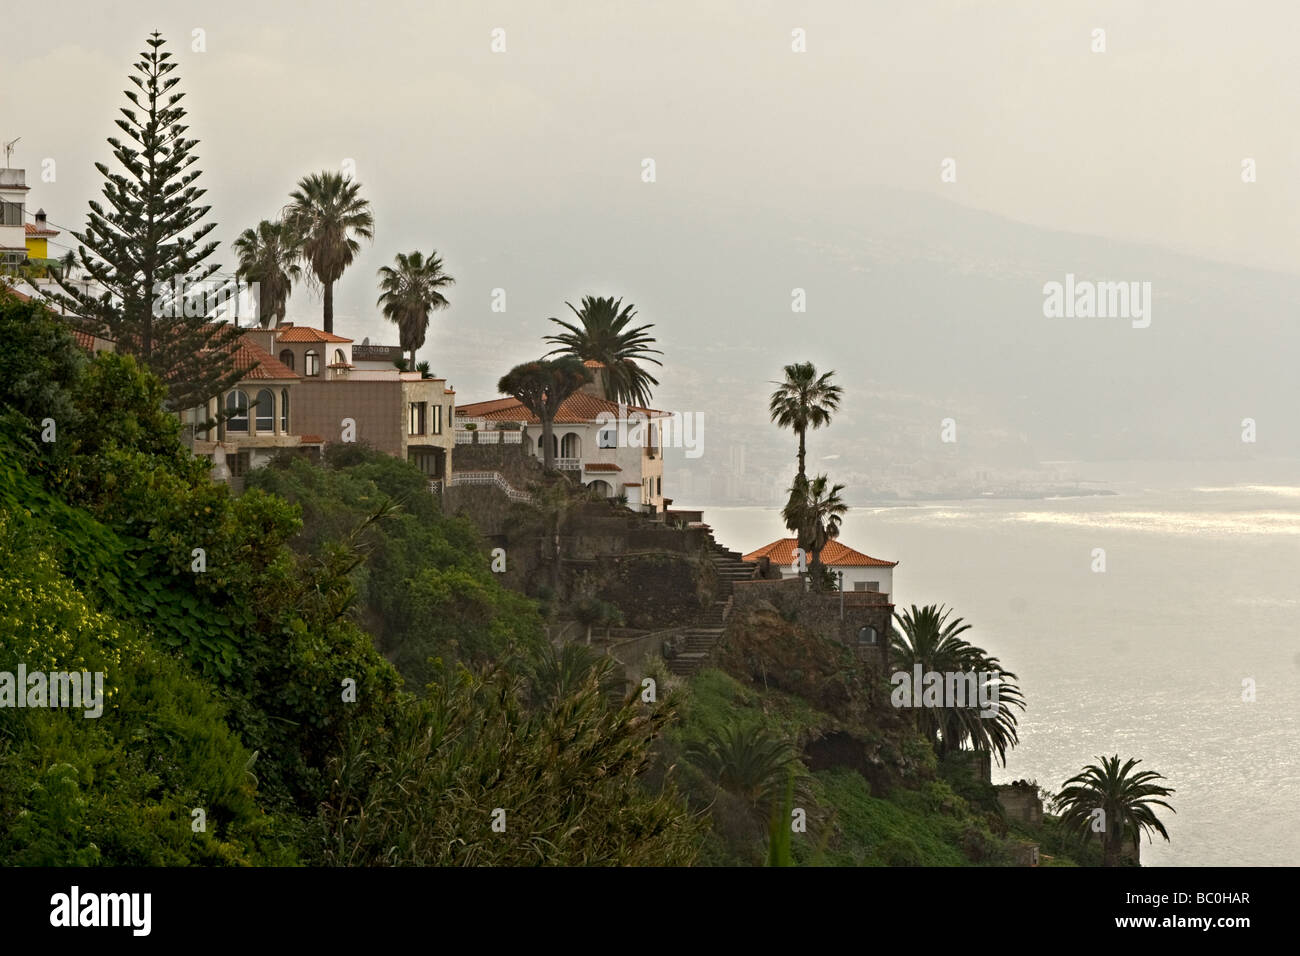 Beach hotels and short-term accommodation houses on the mountain. Stock Photo